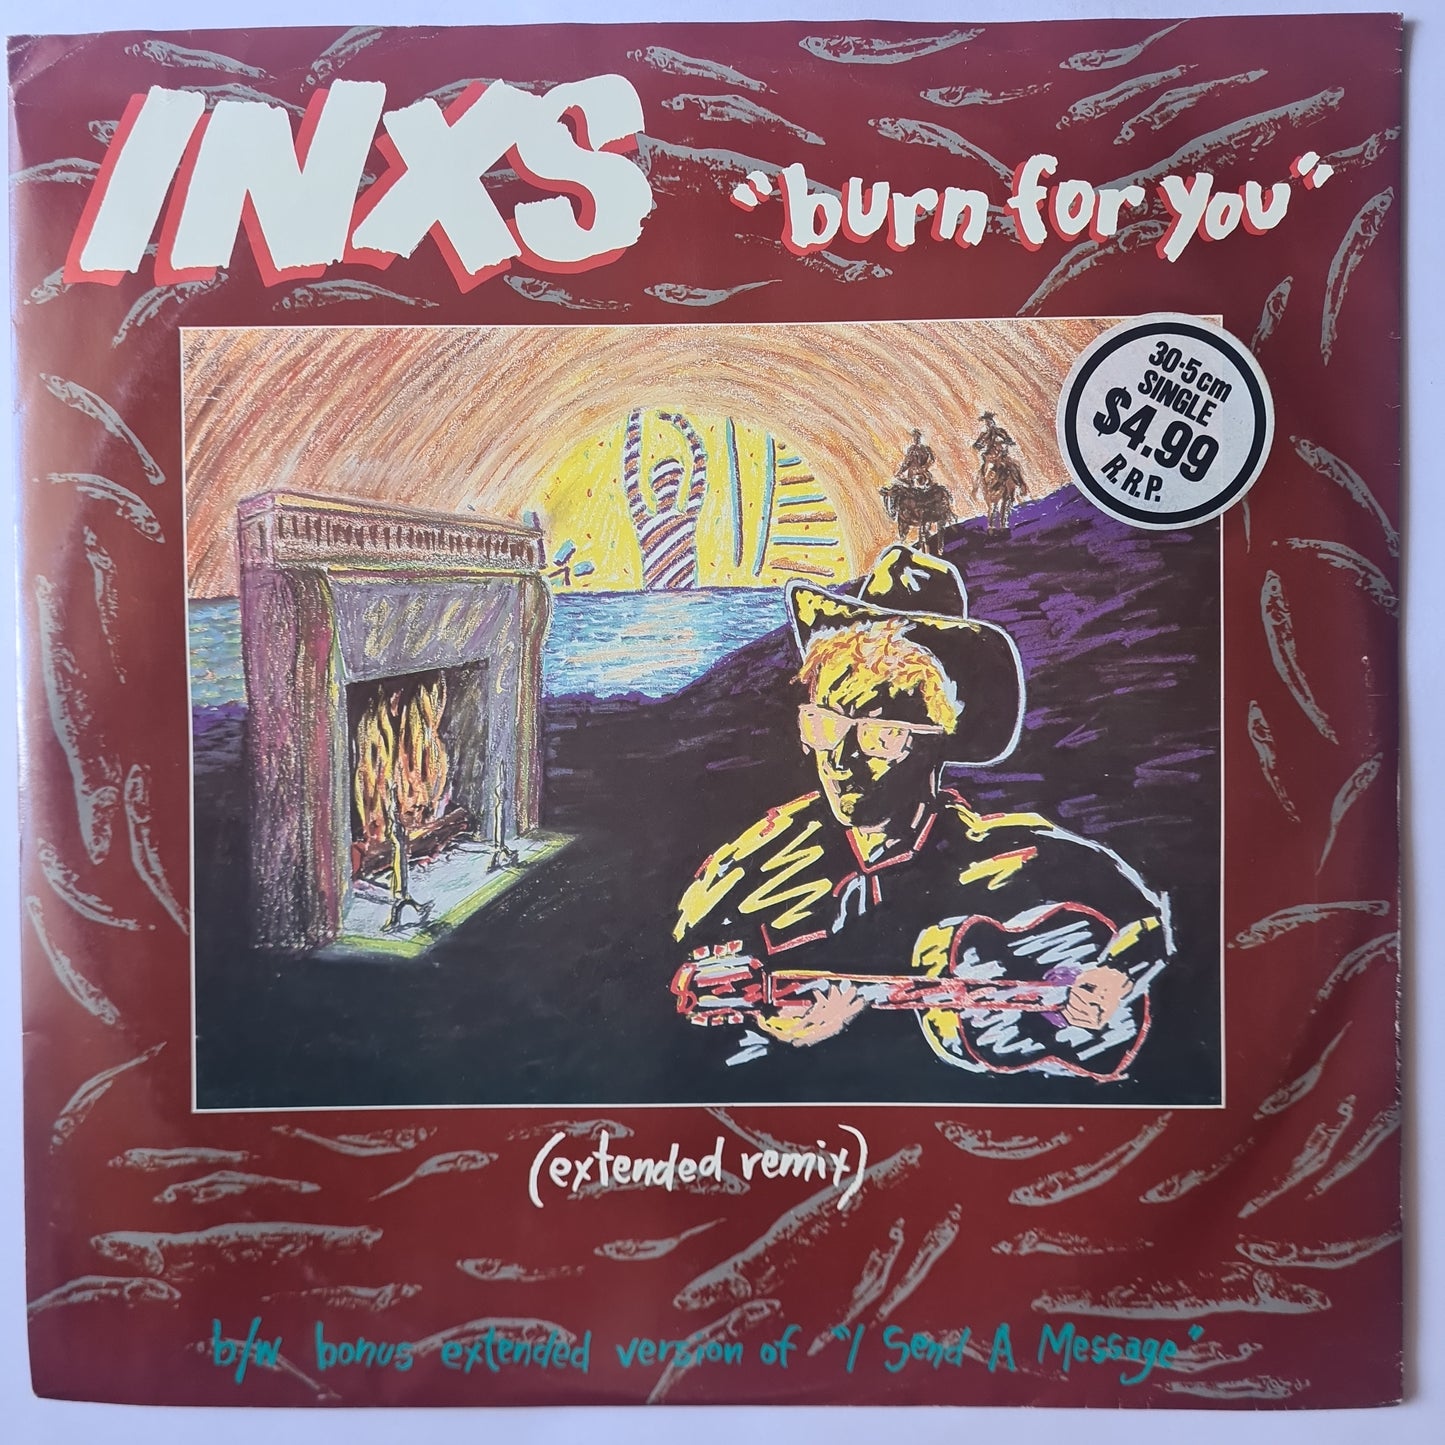 INXS – Burn For You (12inch Maxi Single Extended Version) - 1984 - Vinyl Record